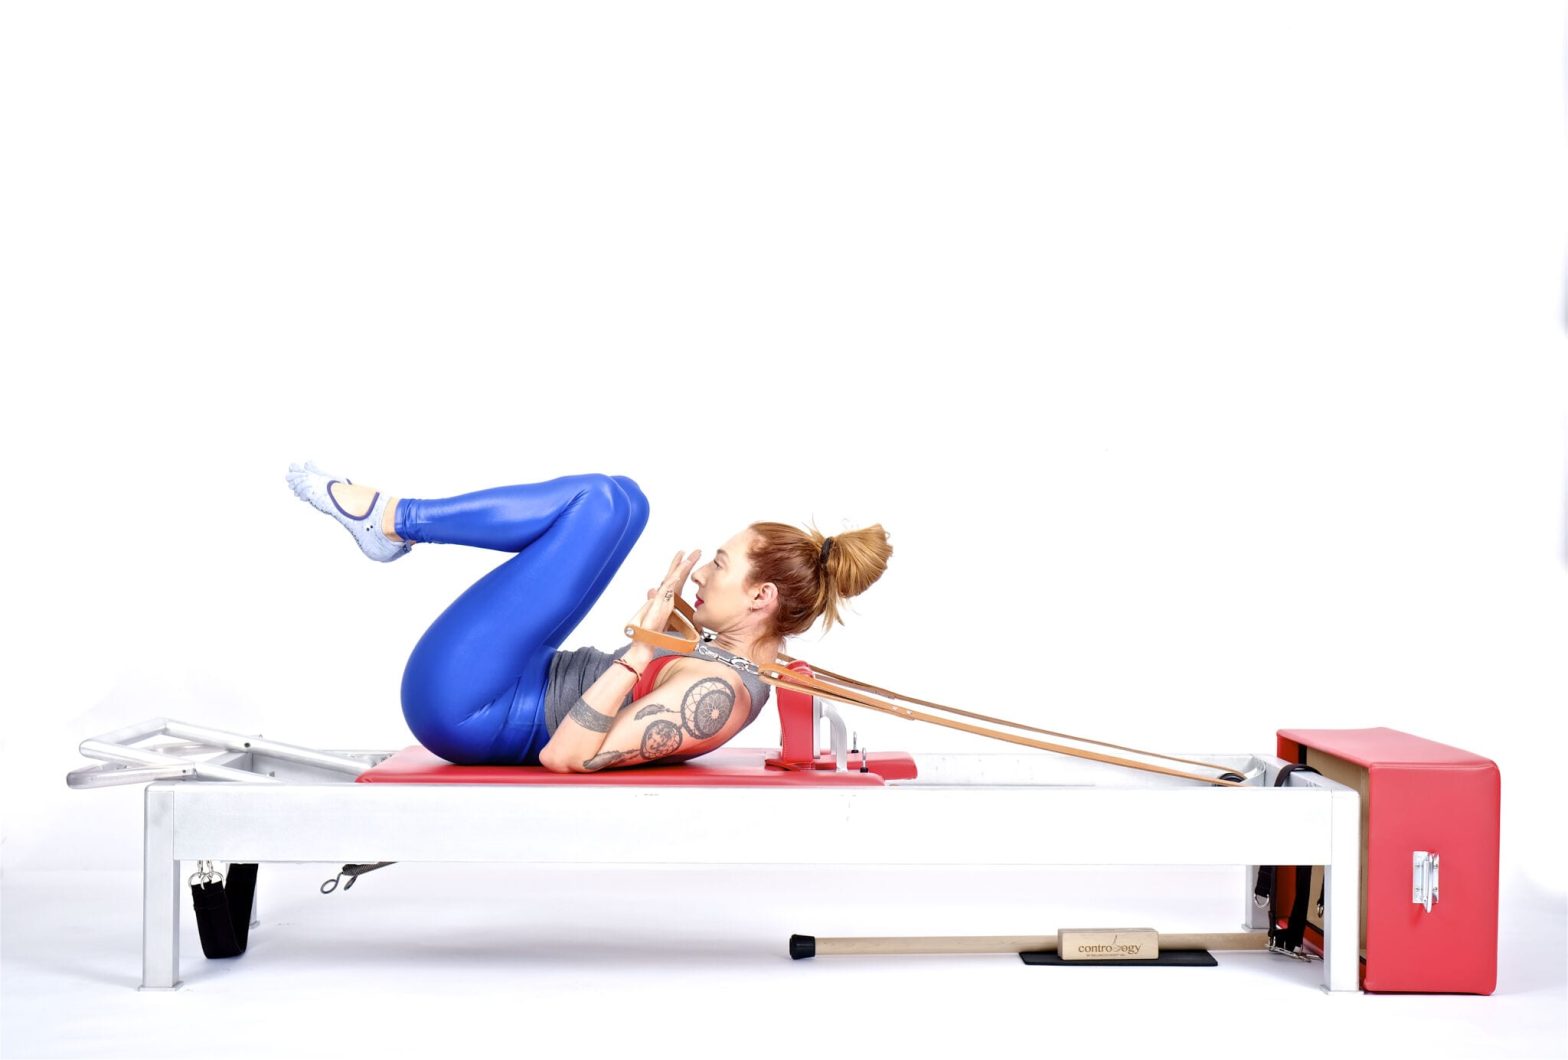 Coordination on the Reformer - Online Pilates Classes